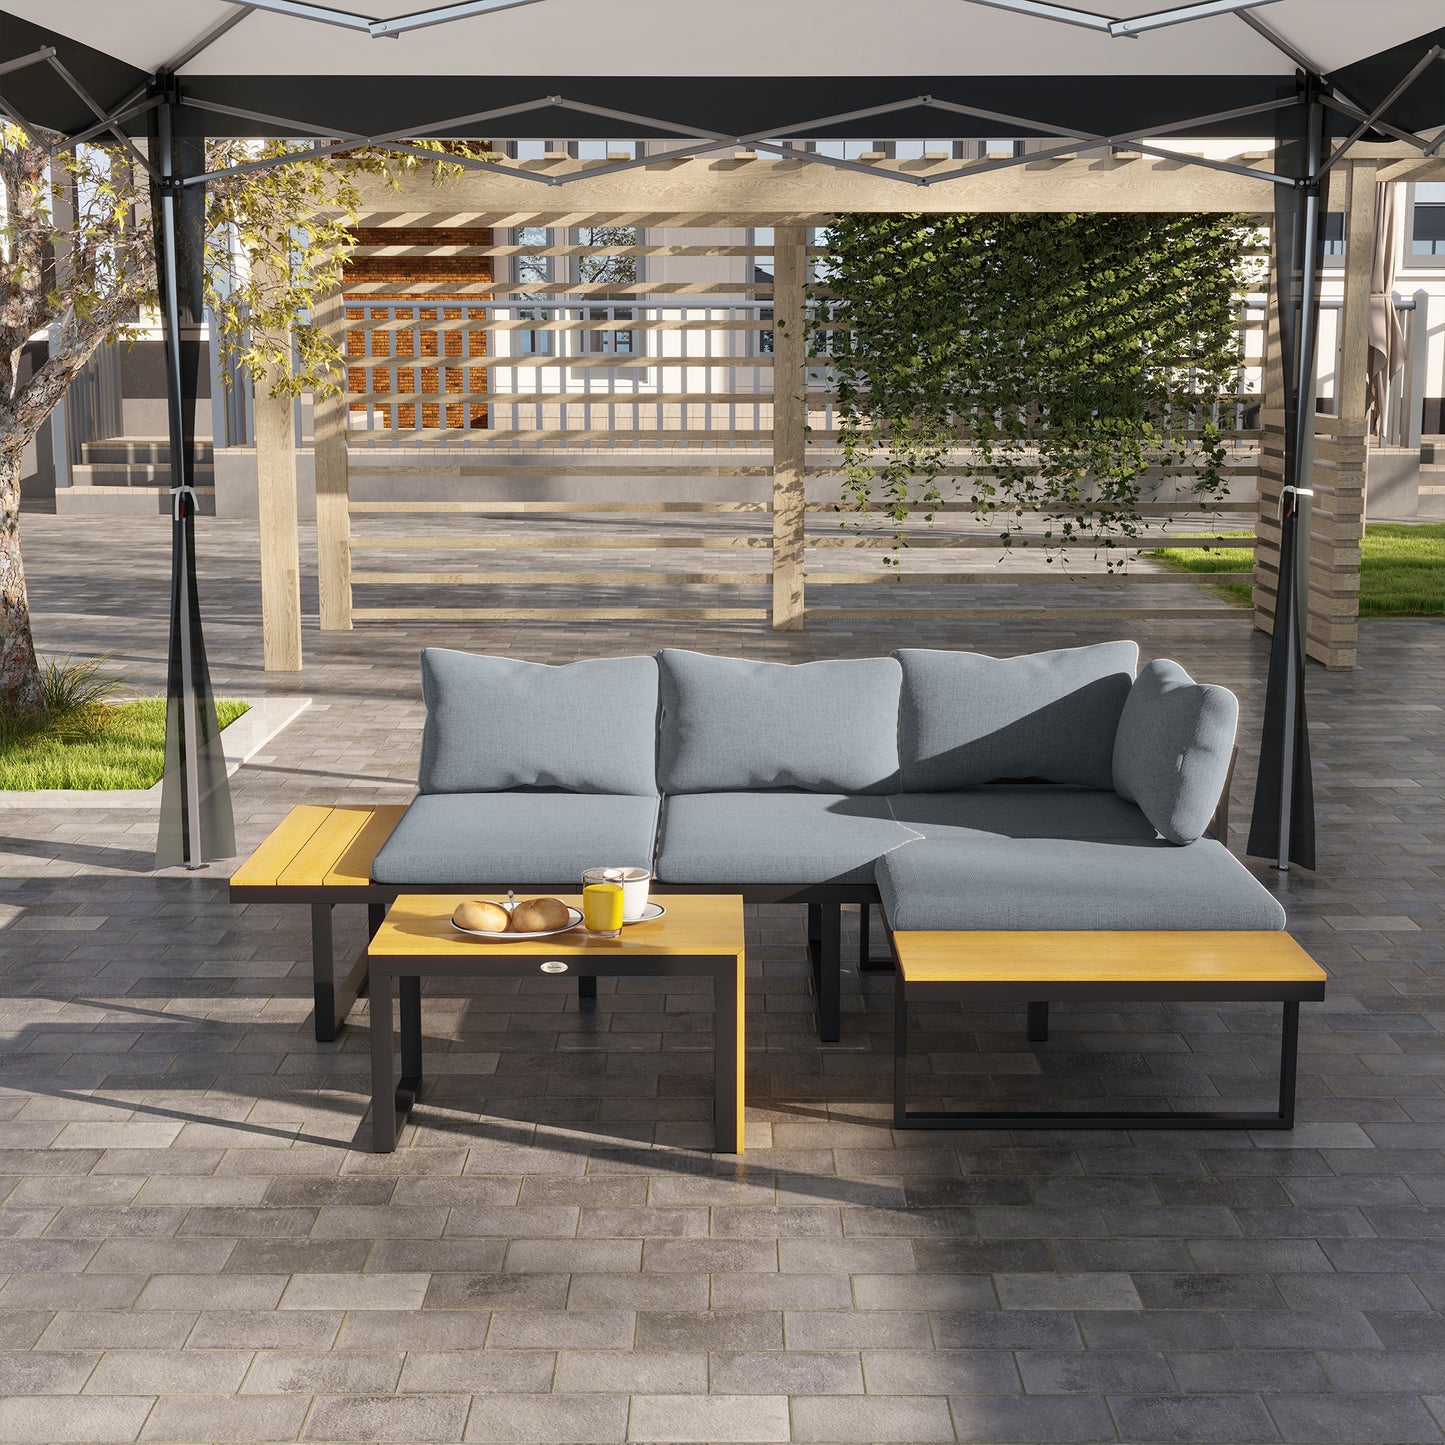 Outsunny 4-Seater Garden Sofa Set Patio Conversation Set w/ Padded Cushions, Wood Grain Plastic Top Table and Side Panel, Dark Grey